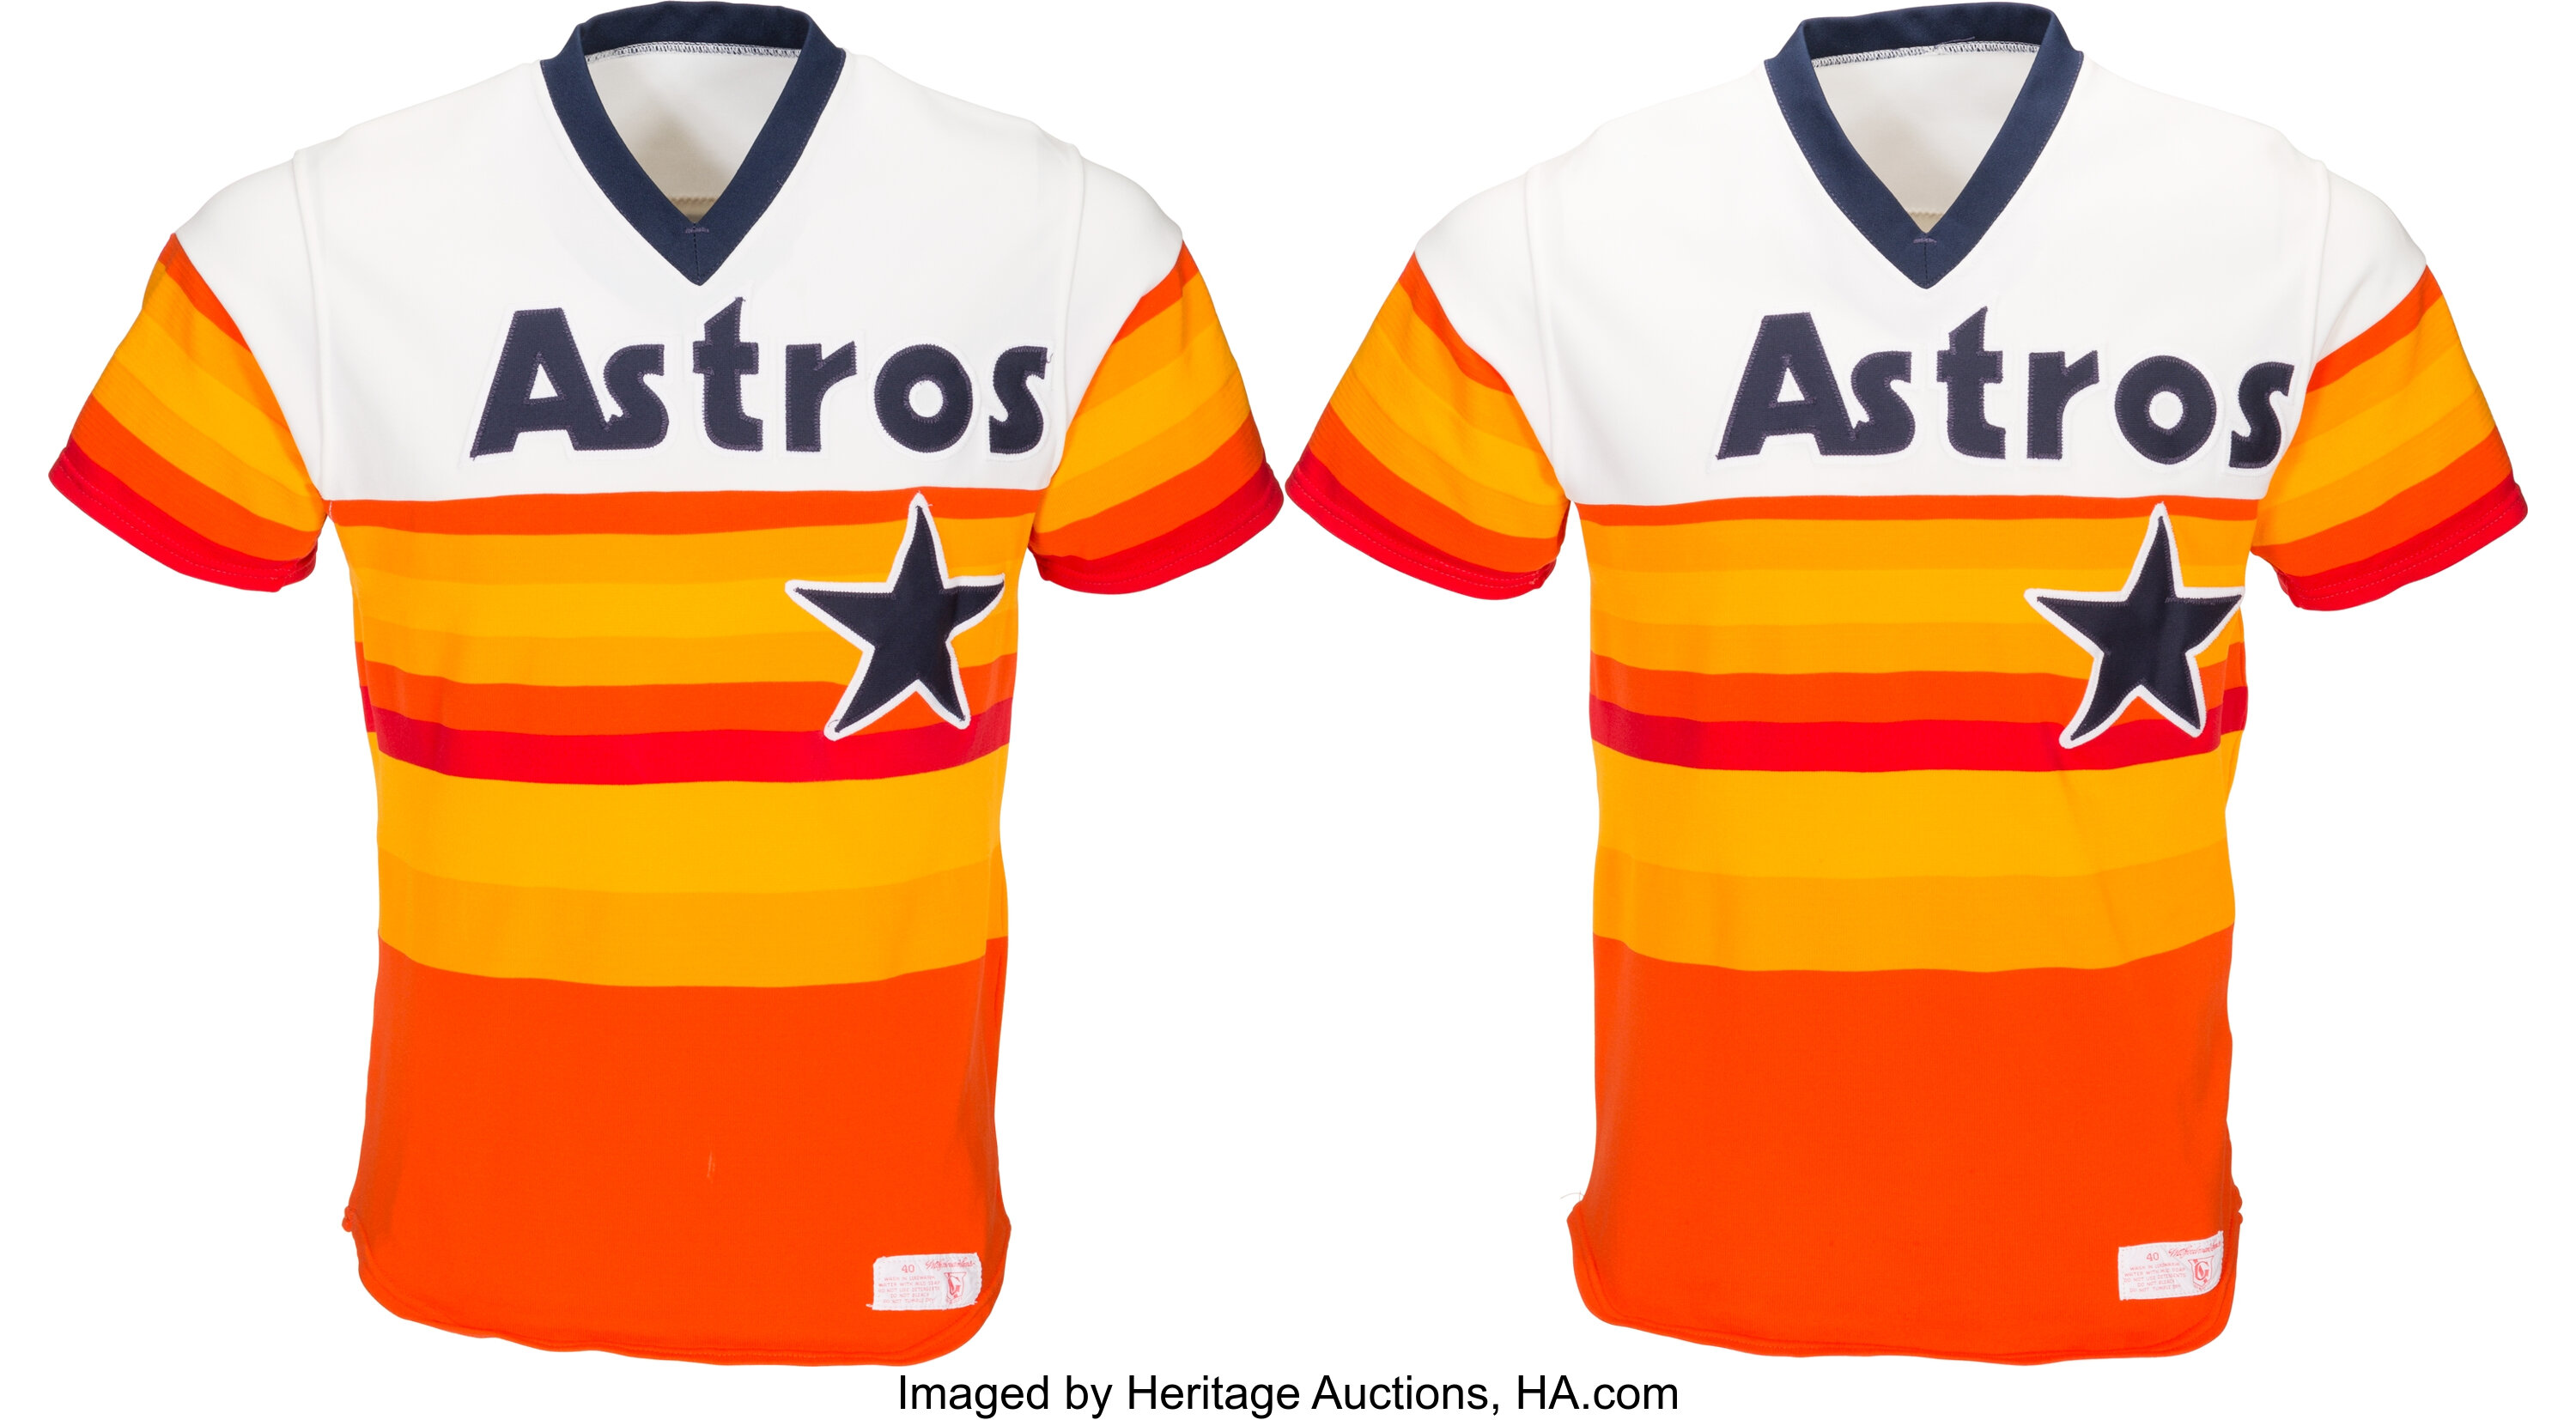 ASTROS OILERS COLORS GEAR. THIS IS NOT A DRILL! : r/Astros